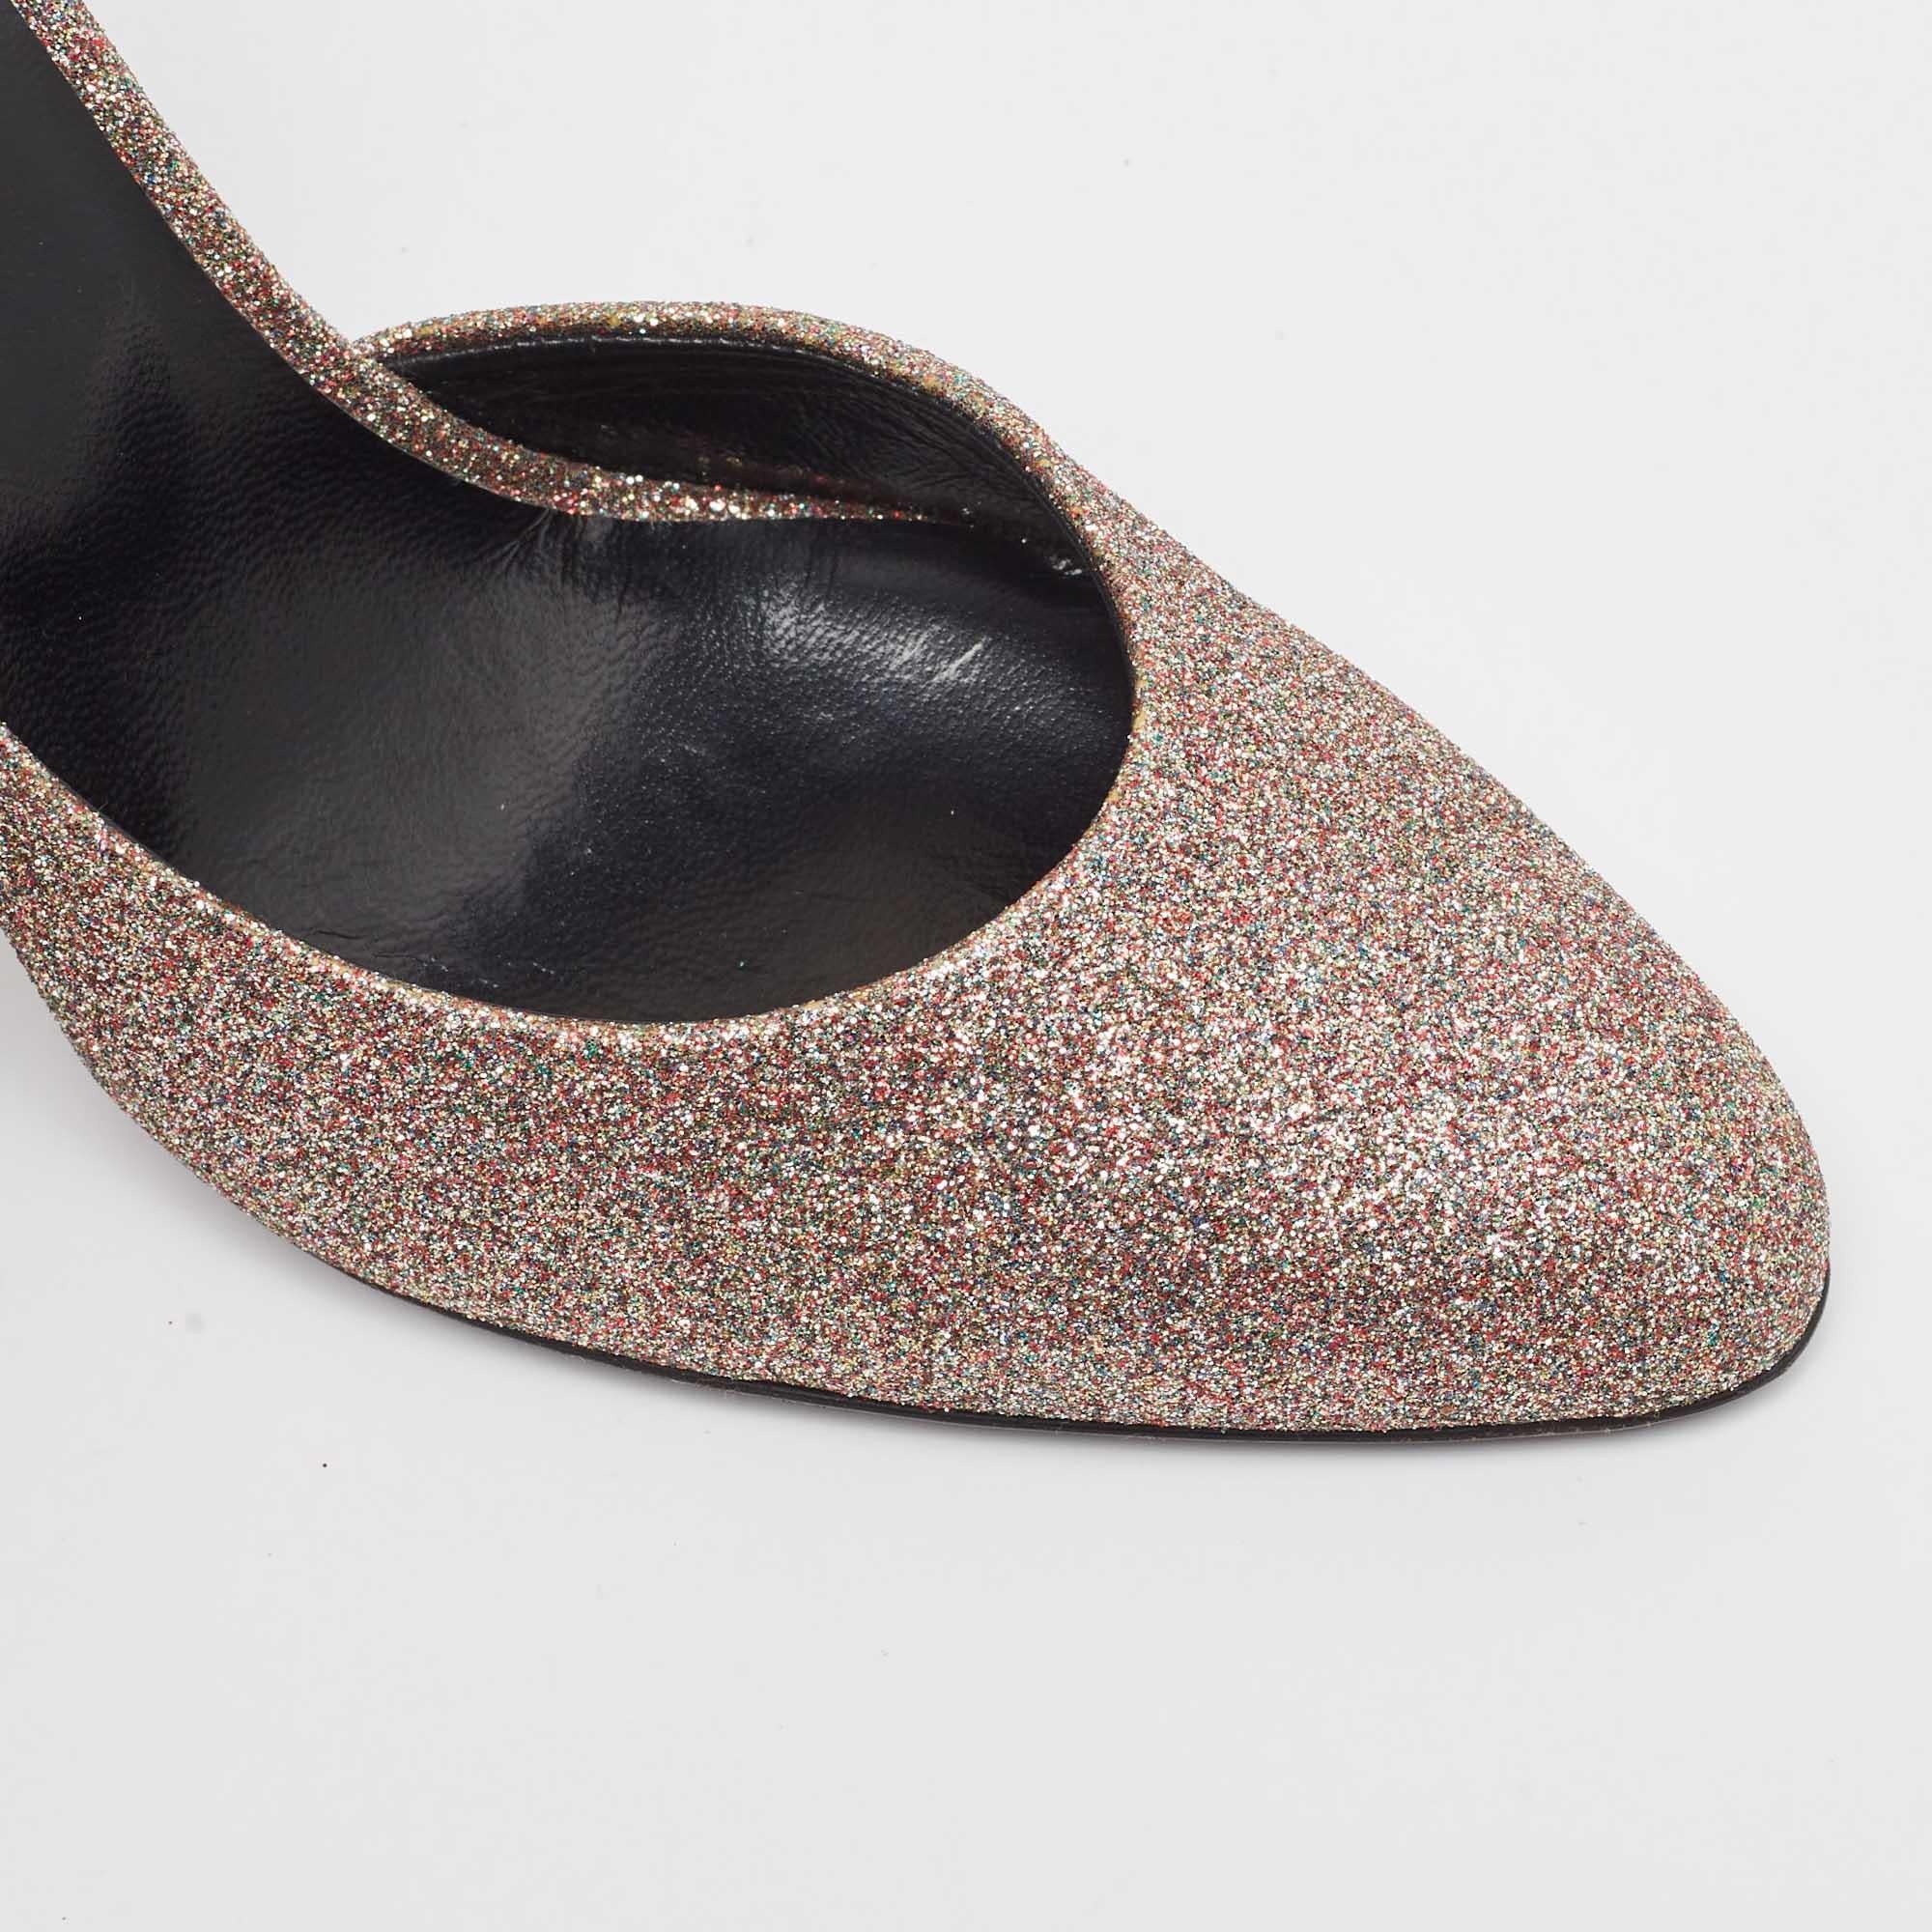 Pierre Hardy Multicolor Glitter Fabric D'orsay Pumps Size 37 For Sale 1